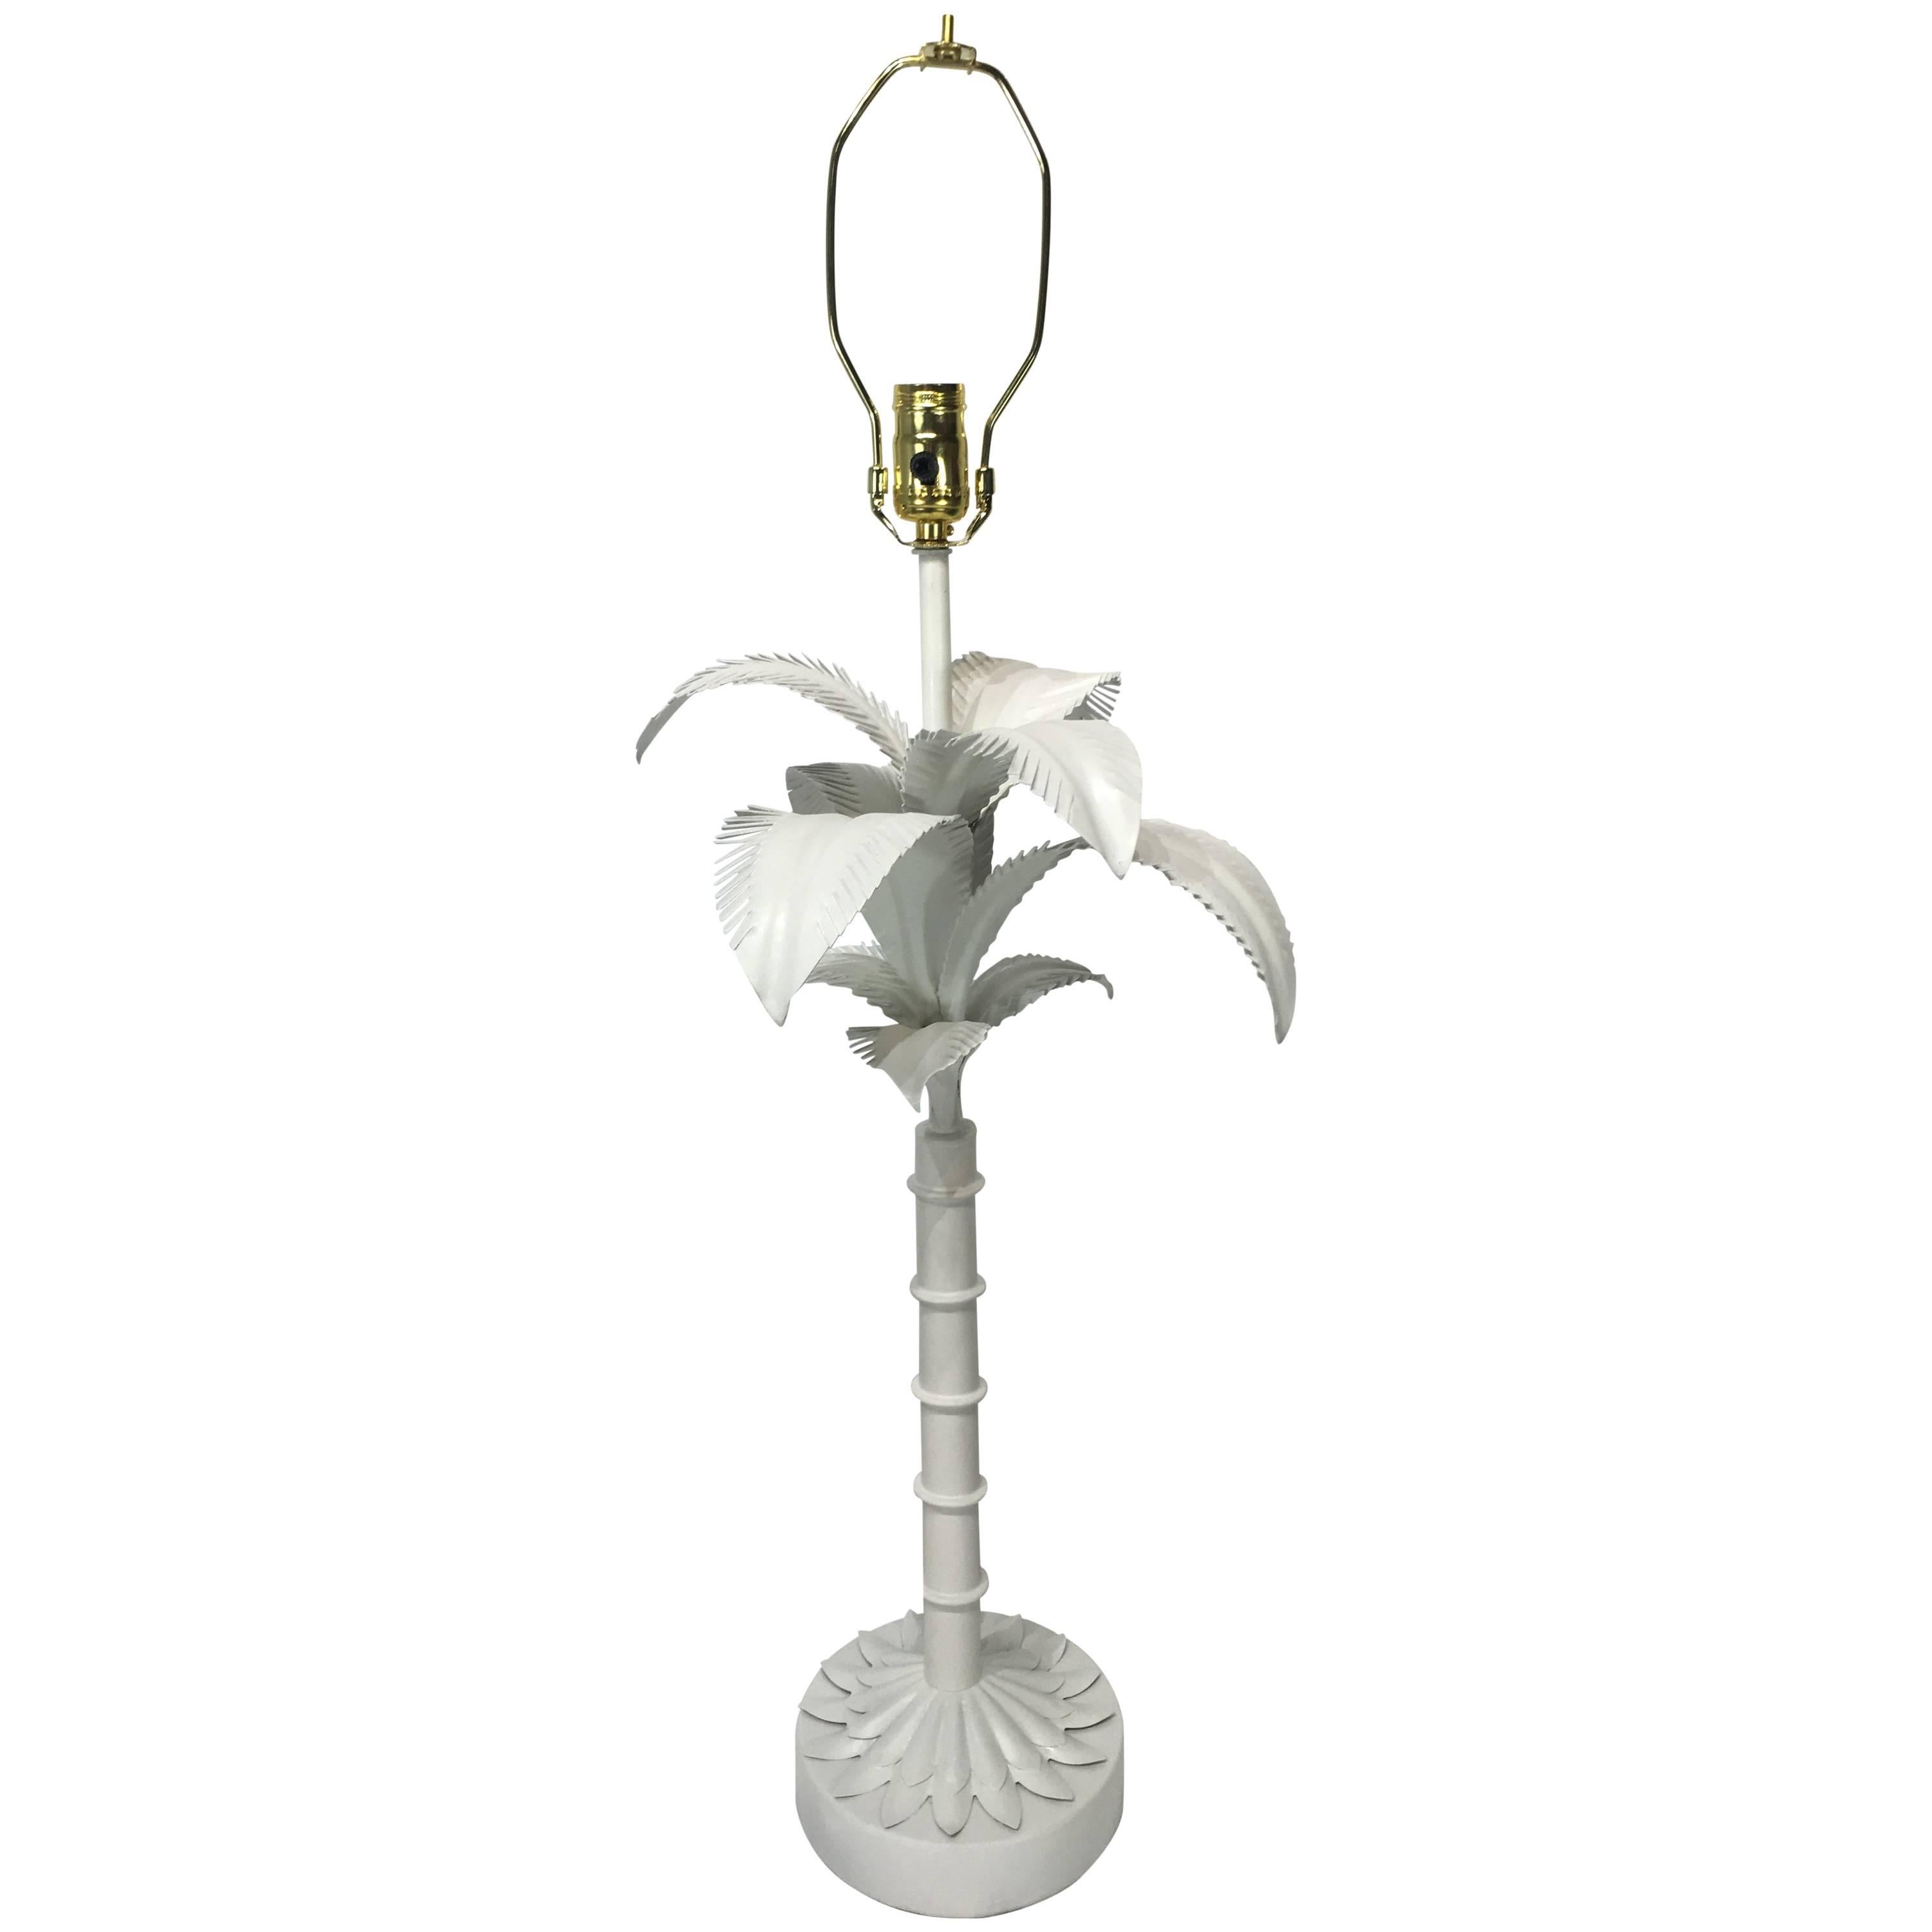 Single palm tree table lamp, of naturalistic form, raised on a circular pedestal base. Shade for display purposes only. 